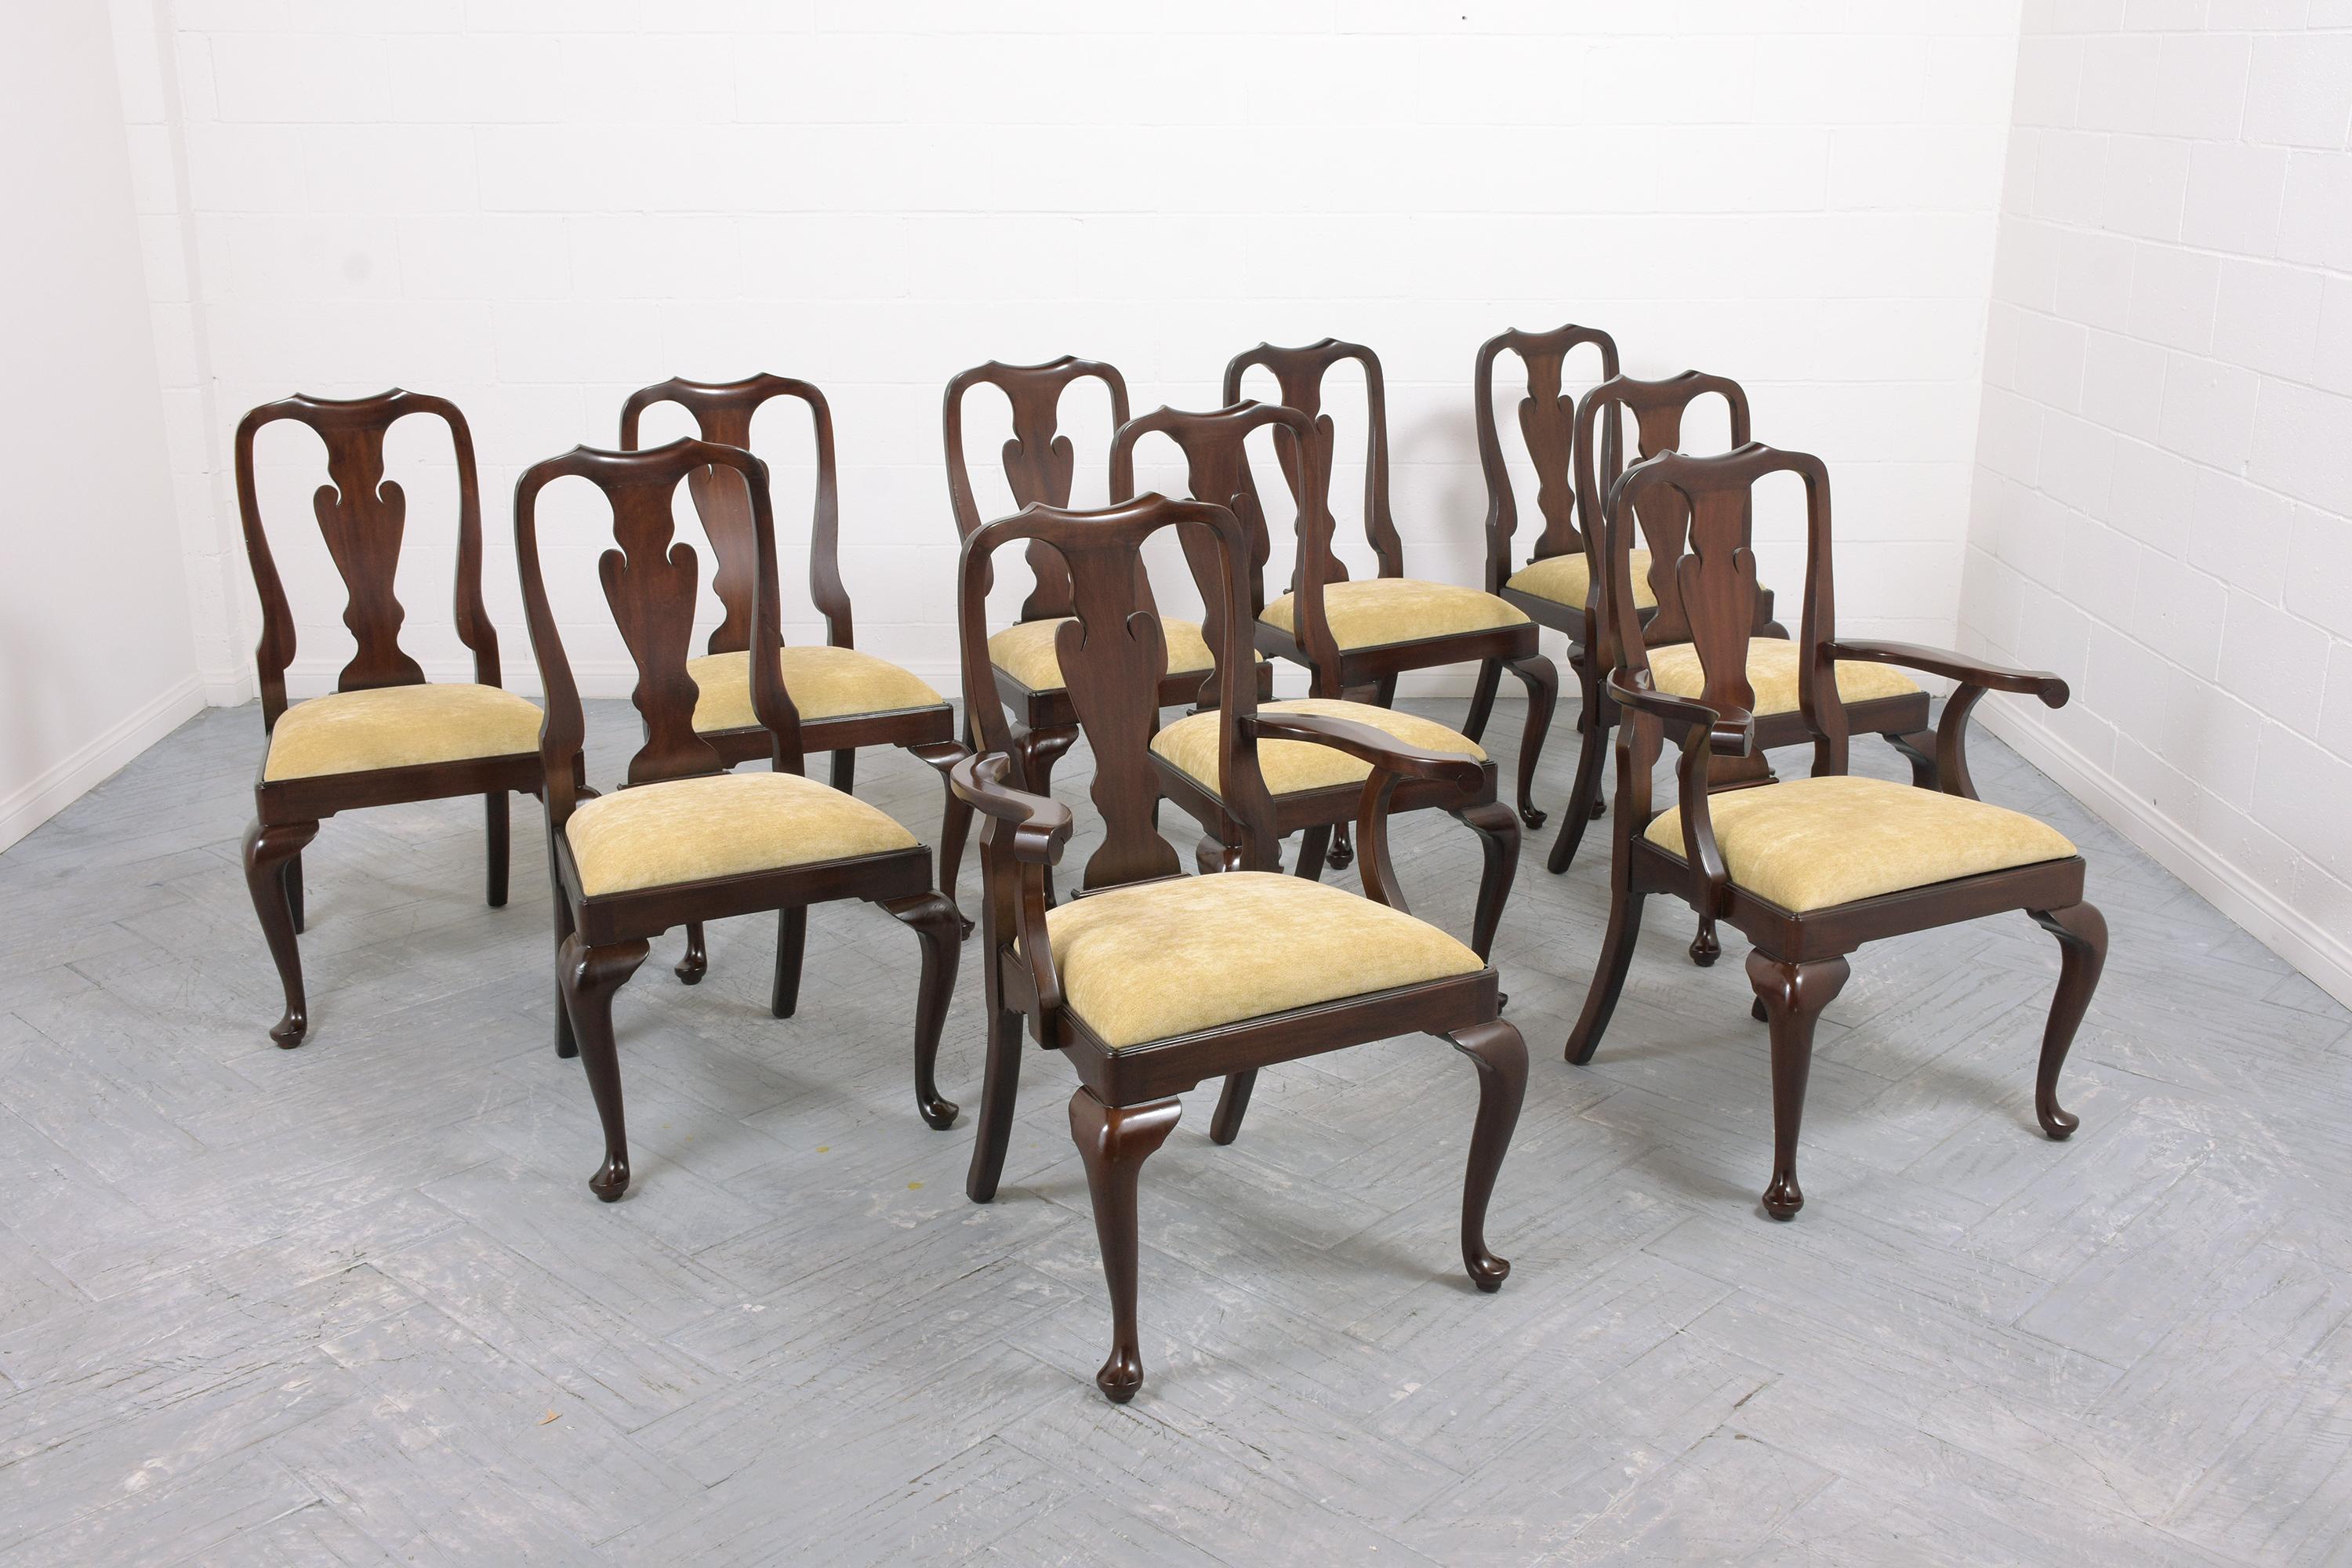 This extraordinary set of ten Queen Anne dining chairs is in great condition, beautifully crafted out of mahogany wood, and has been completely restored by our professional craftsmen team. This vintage dining set comes with two armchairs & eight